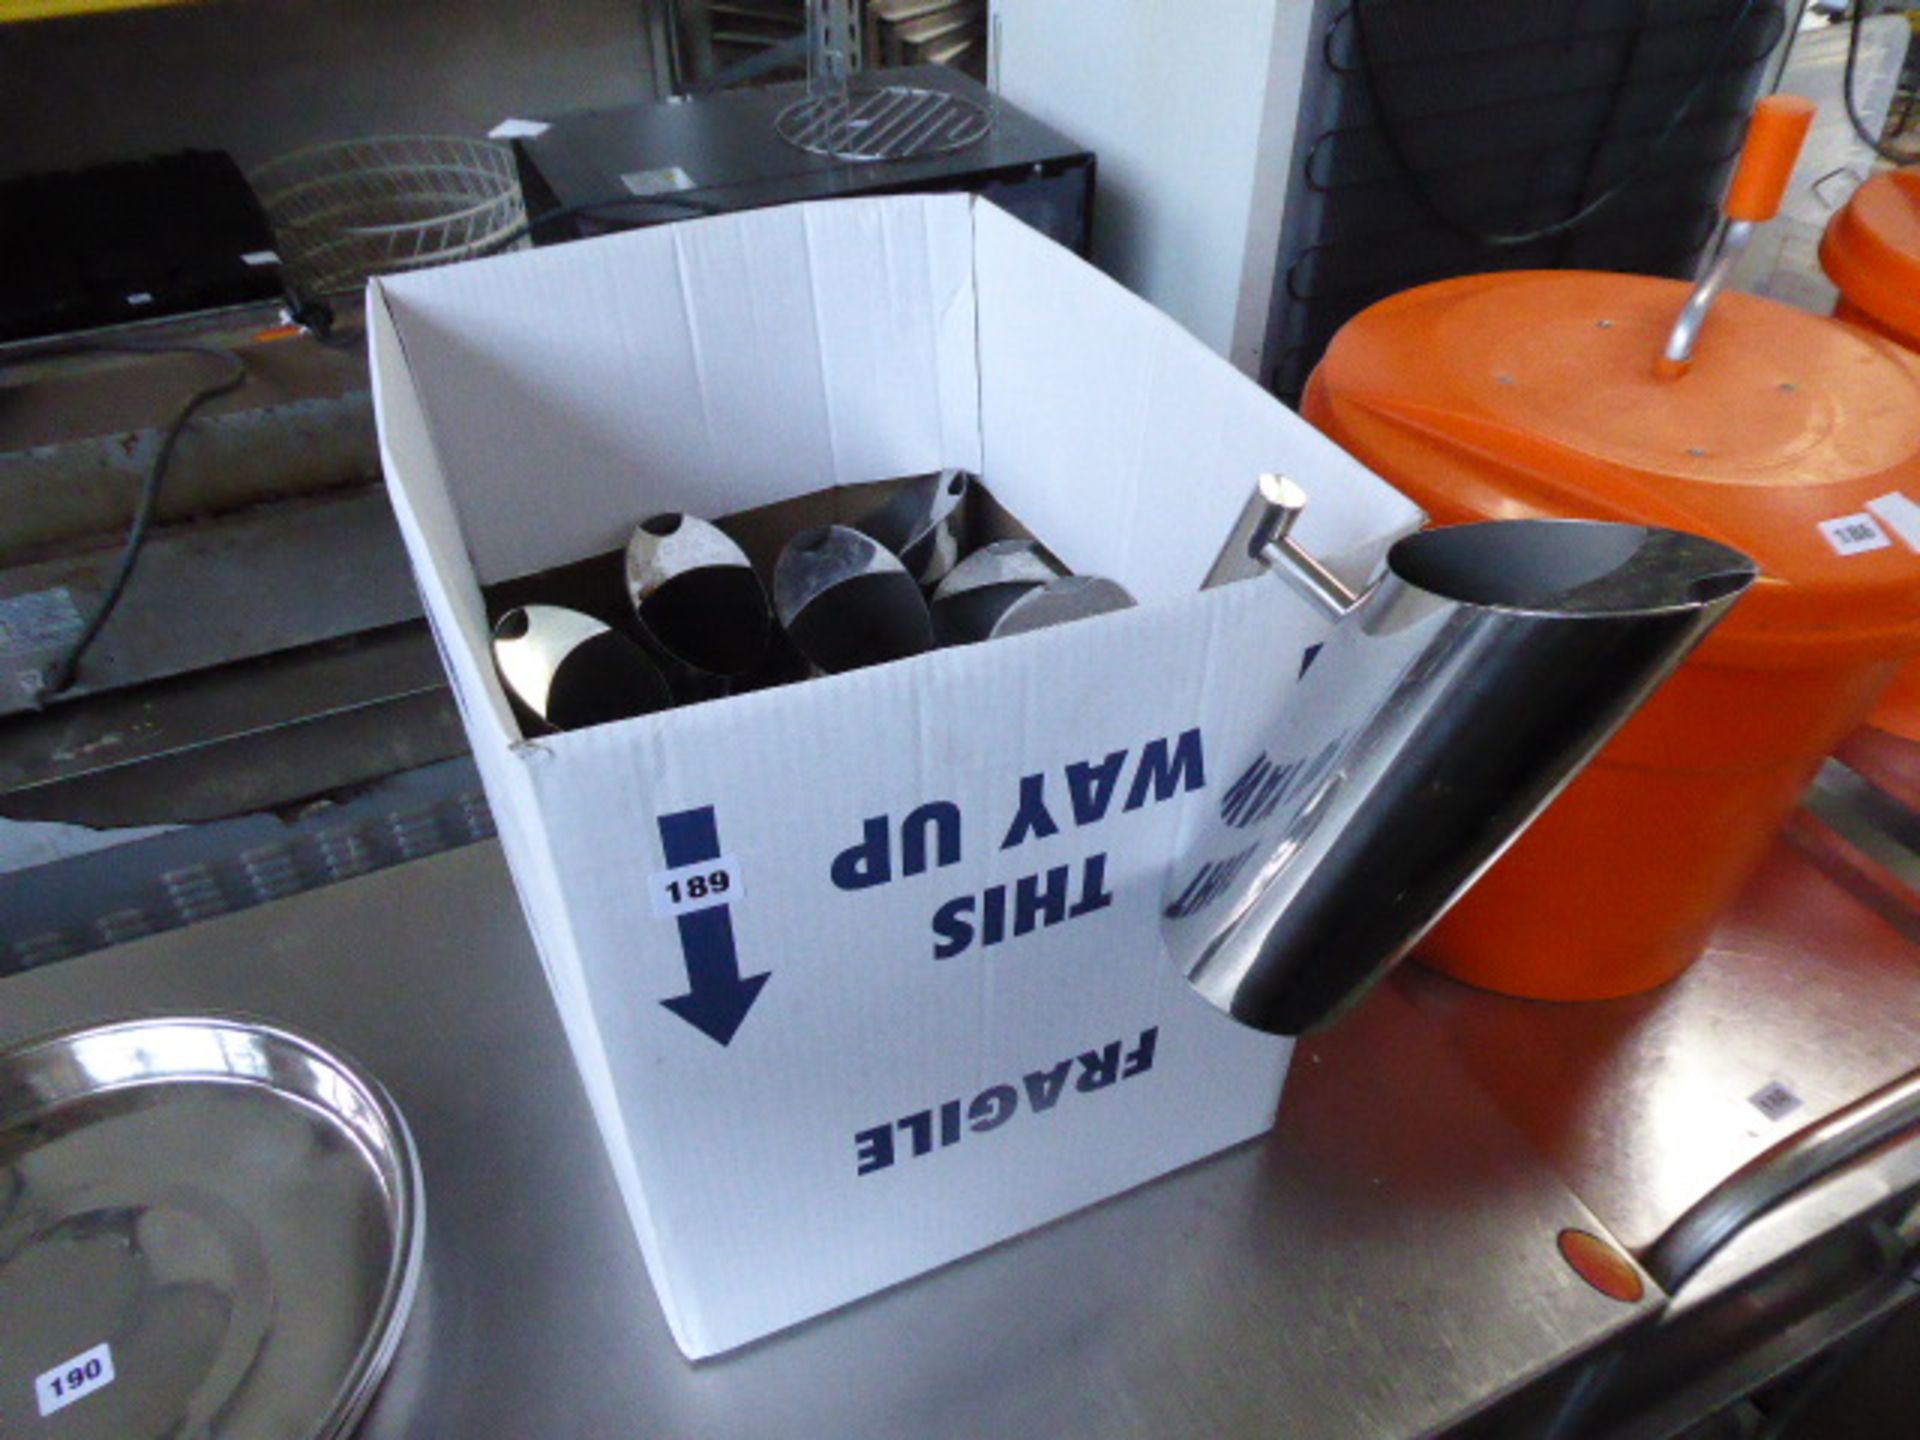 Large box containing stainless steel water jugs